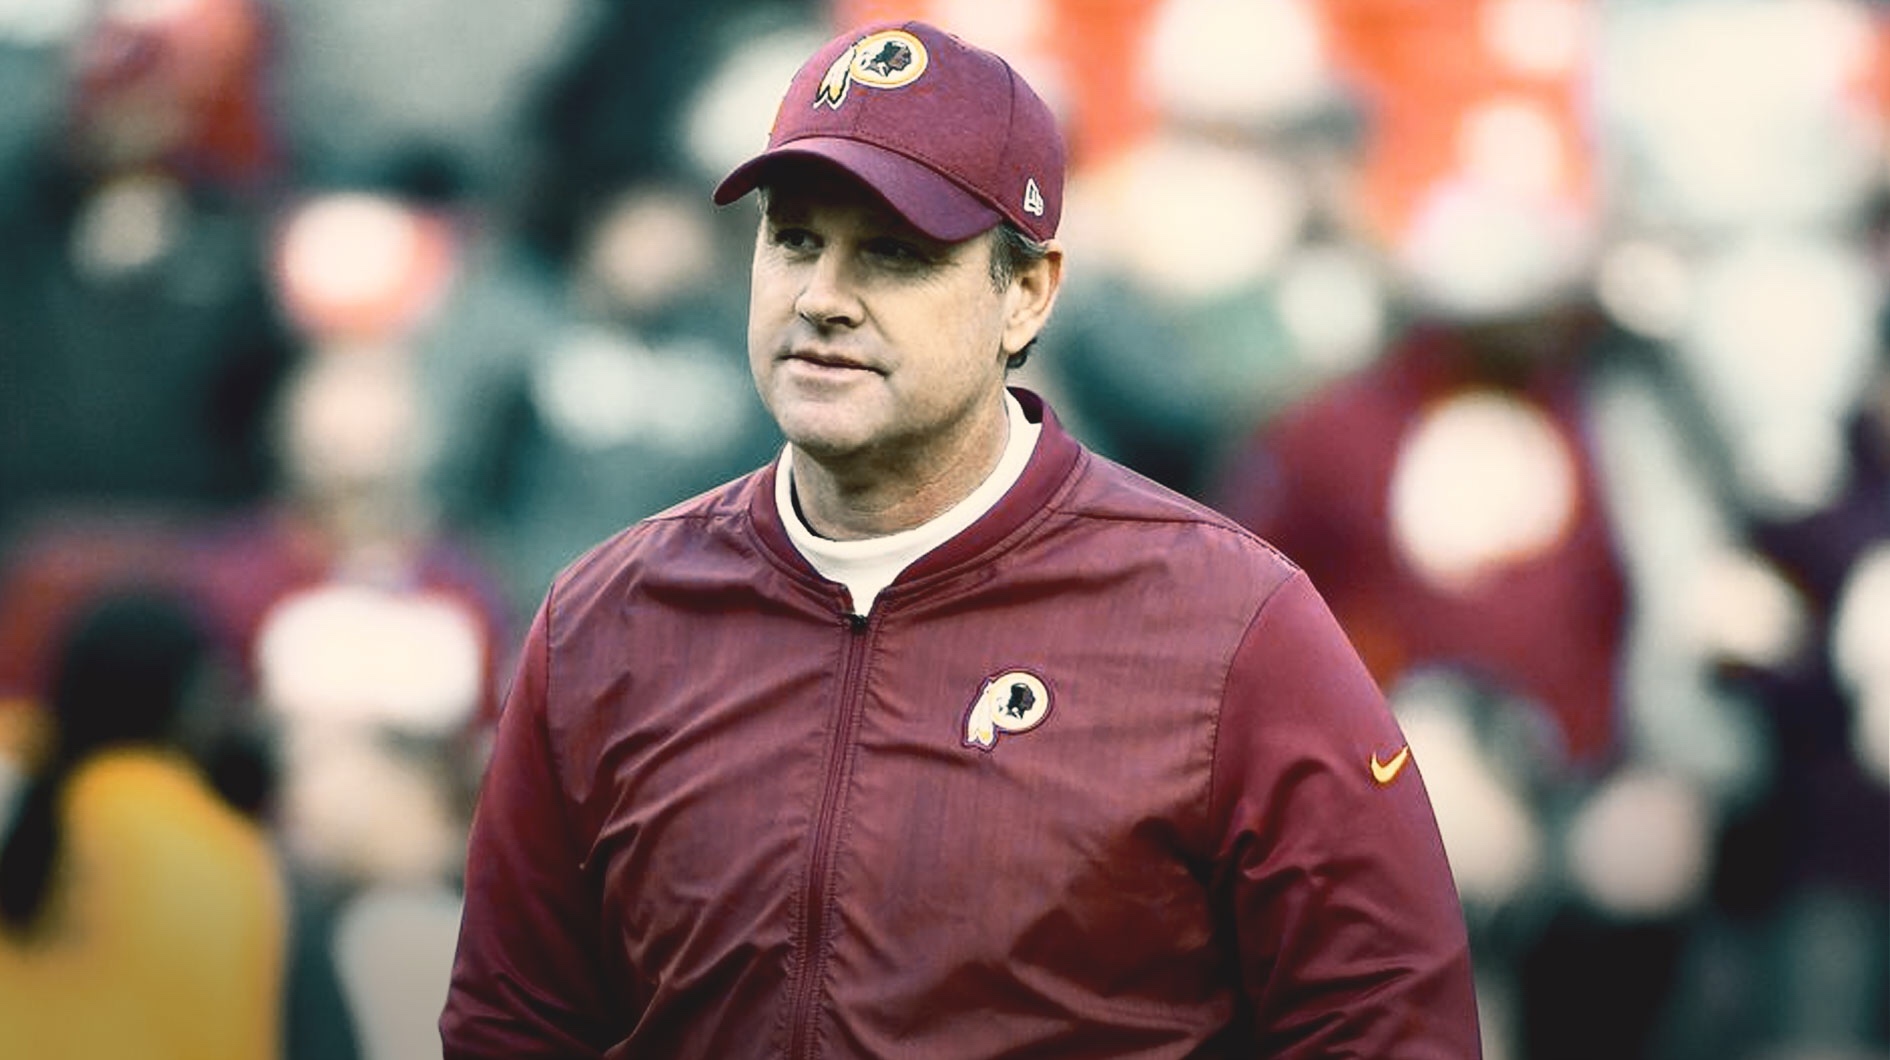 Redskins could fire Gruden if team loses to Giants | Smirfitts Speech